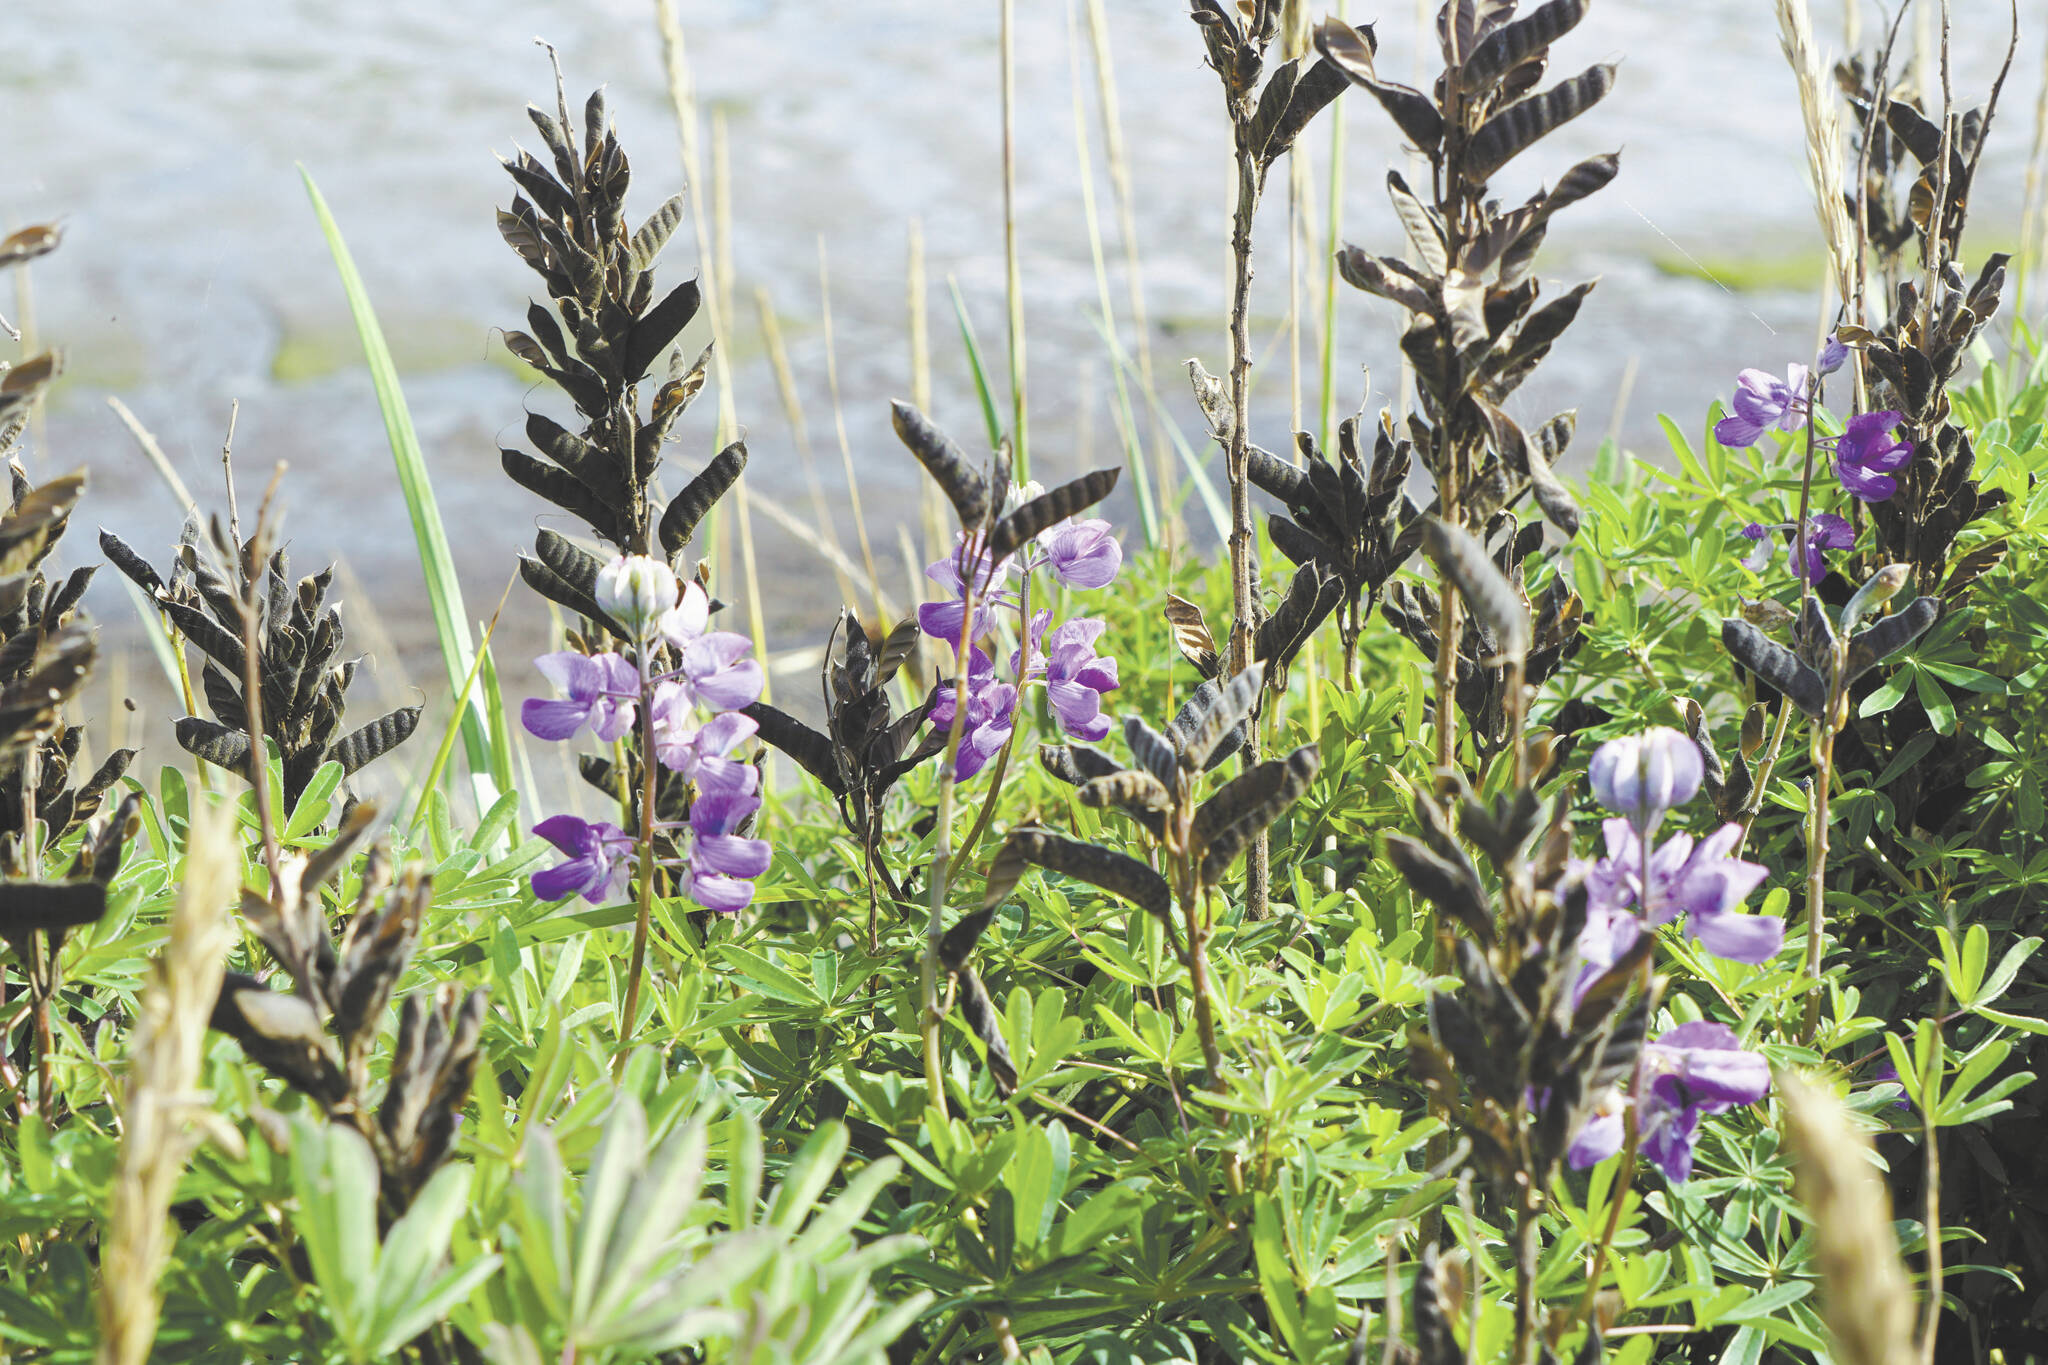 Photo by Michael Armstrong/Homer News
All but a few lupine flowers had gone to seed on Monday, Aug. 29, along the Homer Spit Trail in Homer.